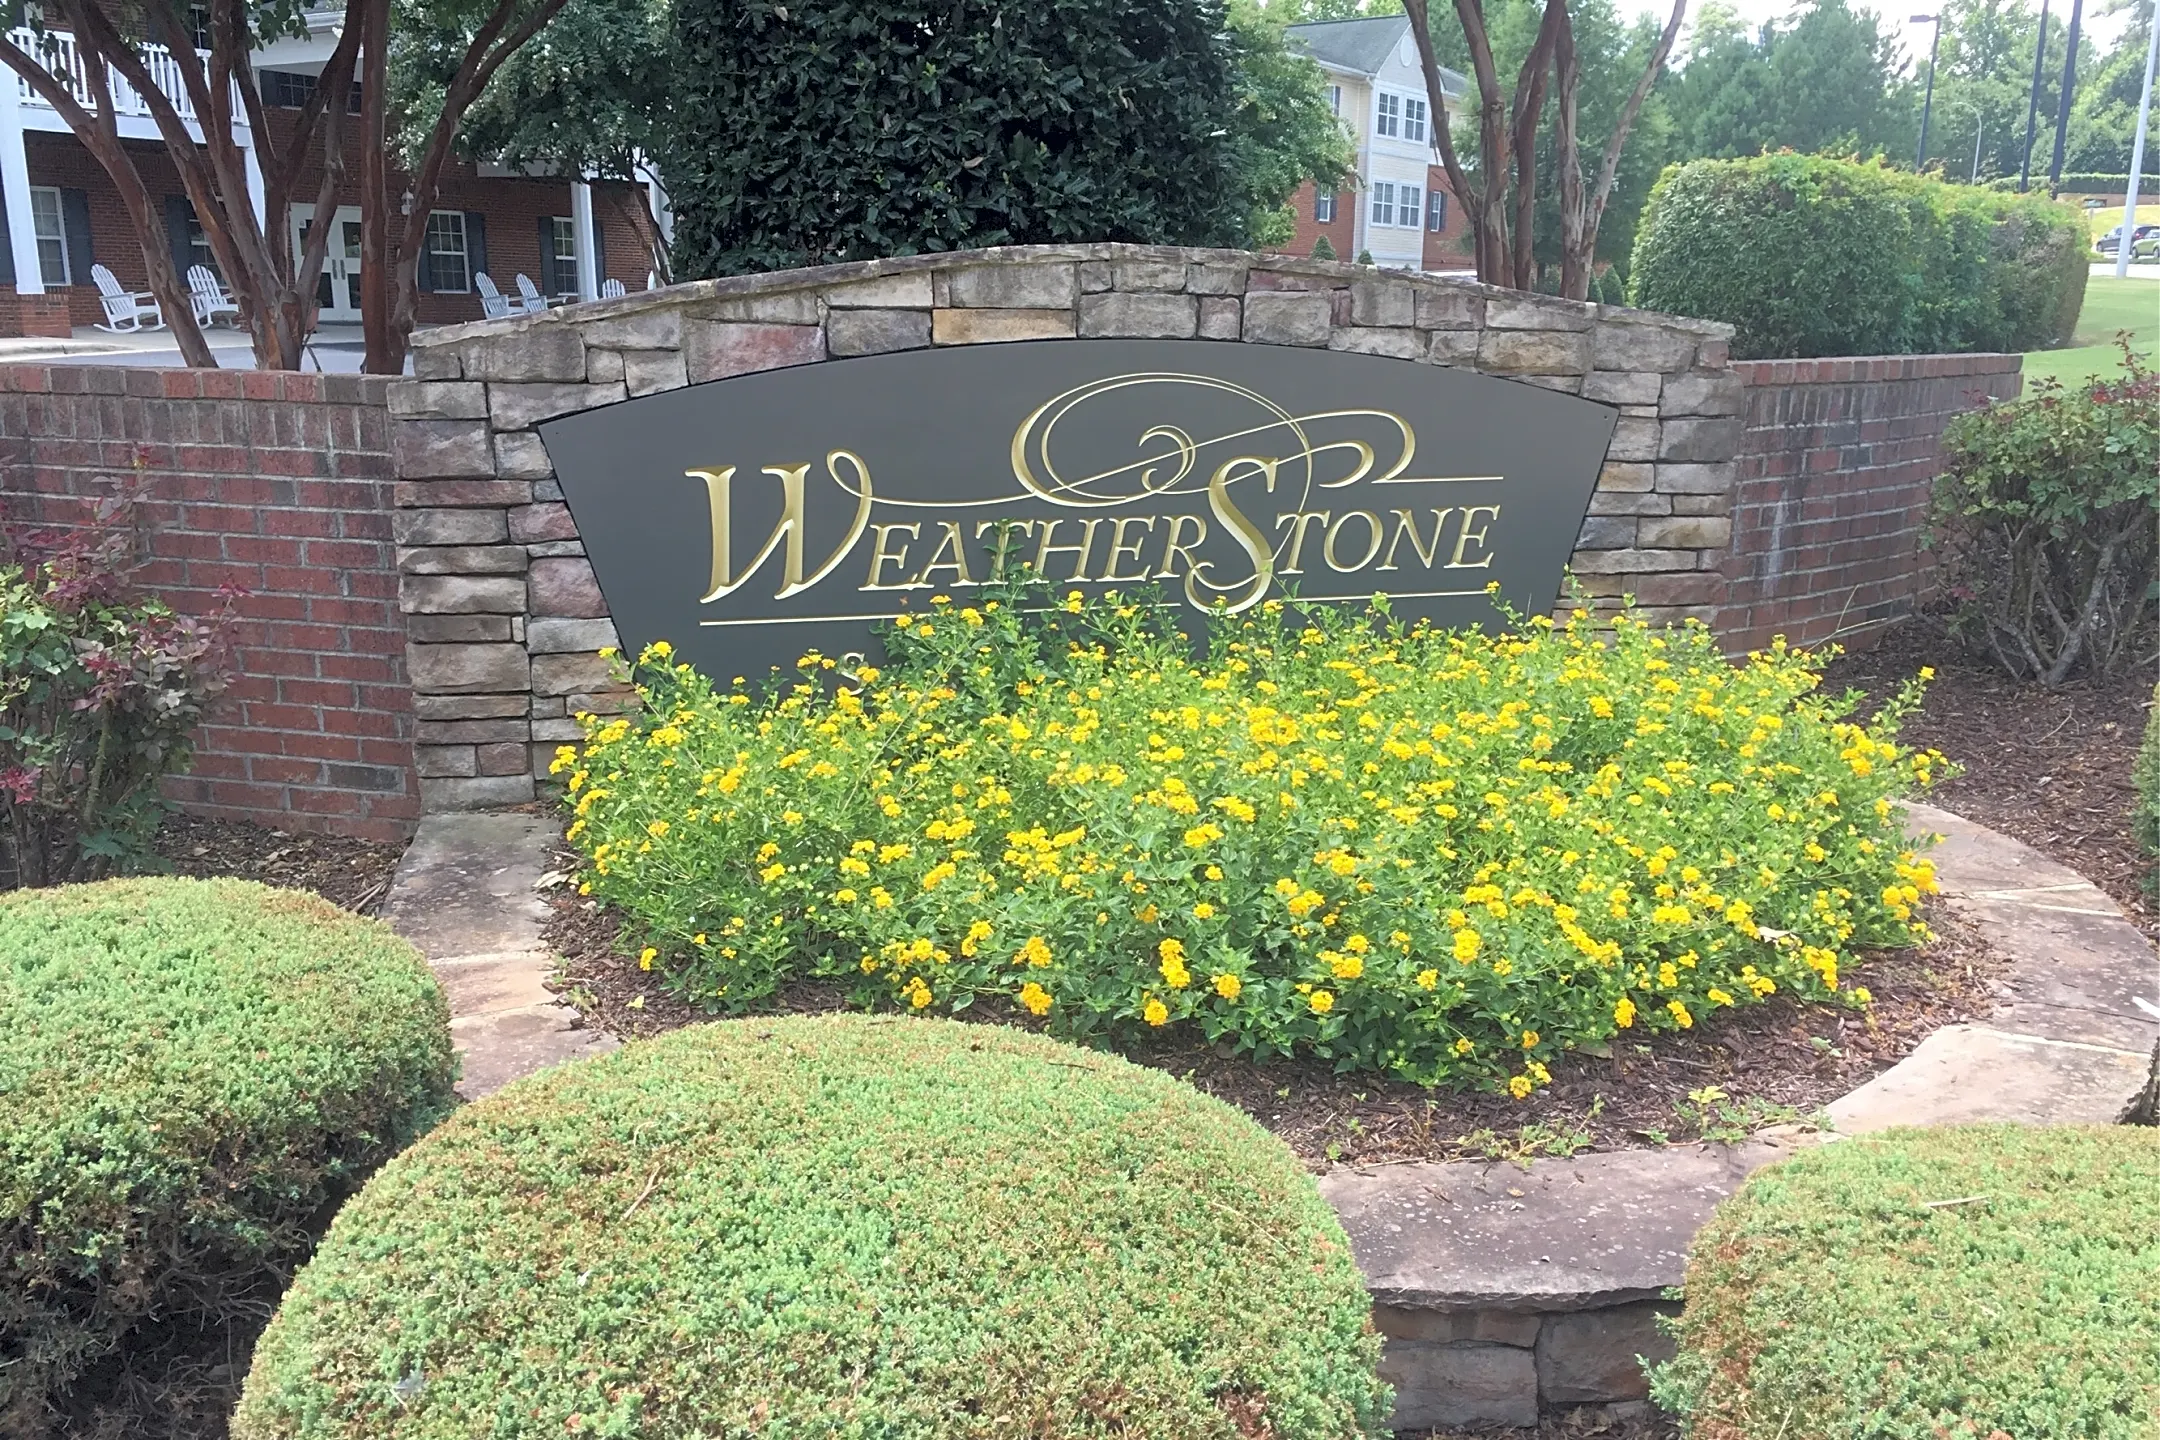 Pool - Weatherstone Spring - Cary, NC